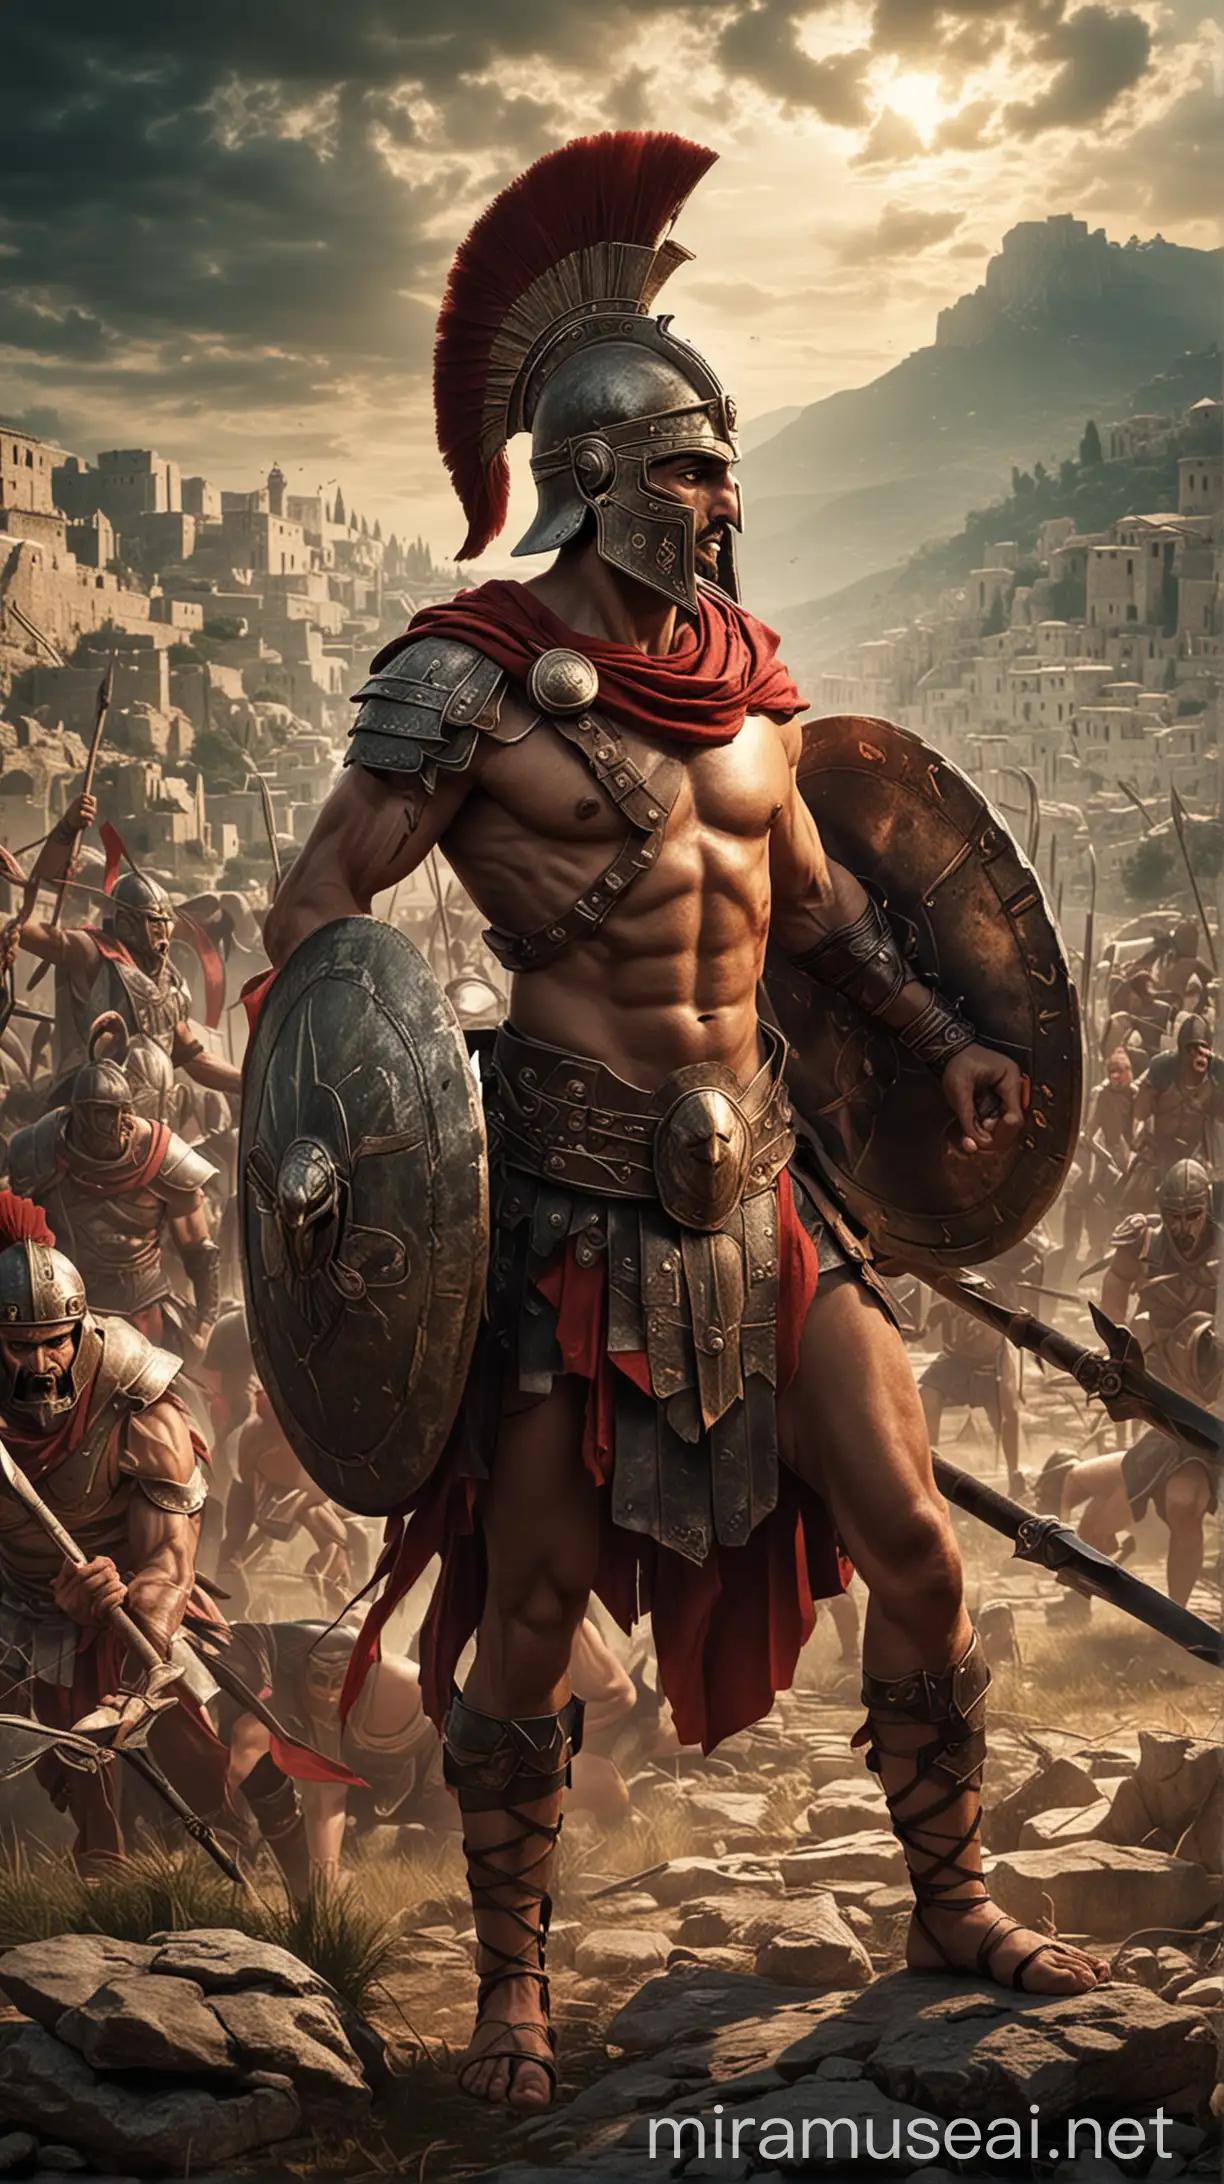 "Let's uncover the tales of the hoplites, the fierce guardians of their cities." hyper realistic